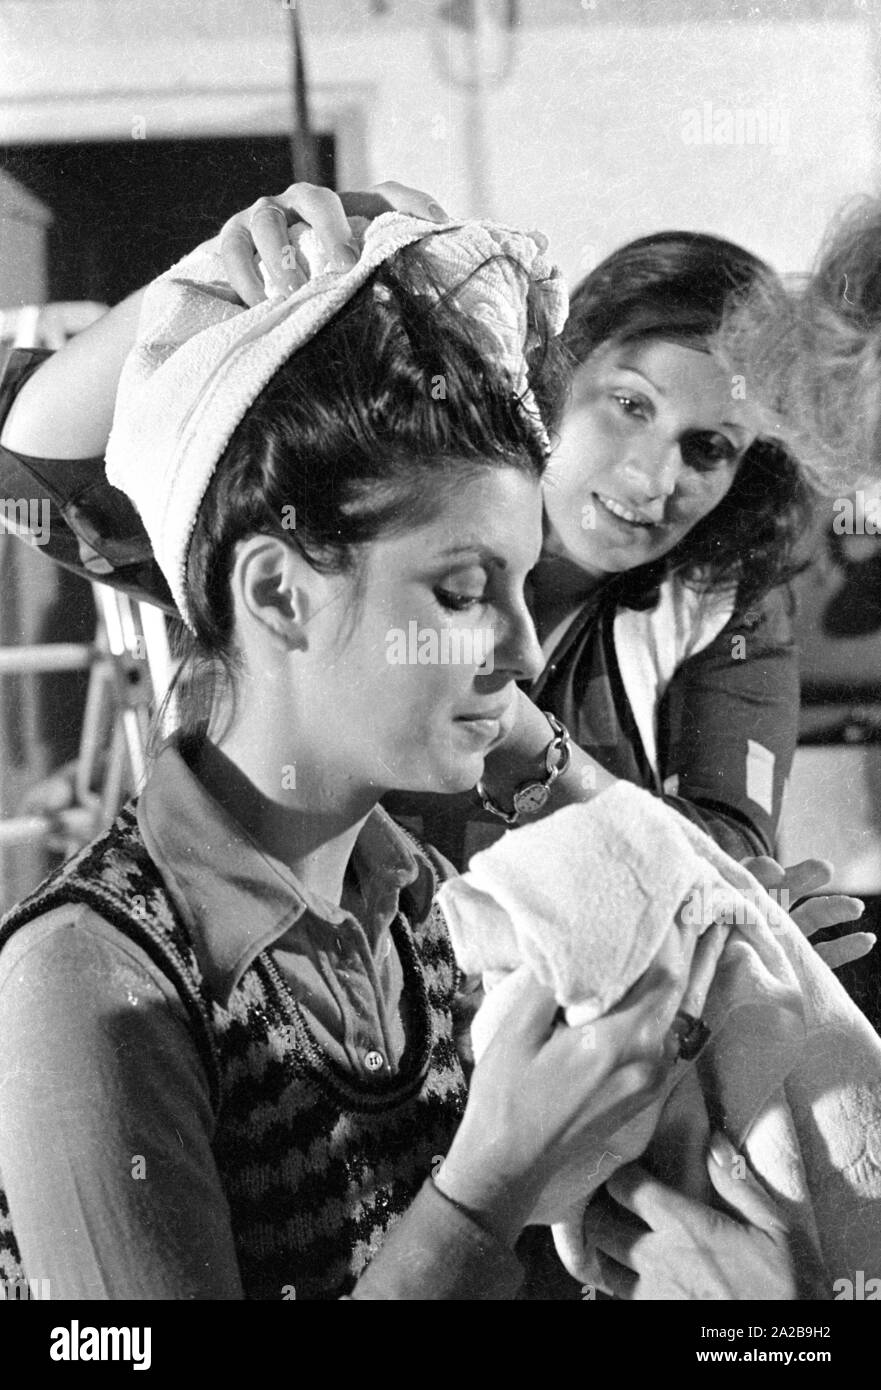 The American actress Tina Sinatra (l.) at a filming, probably for the TV series 'It Takes a Thief'. Stock Photo